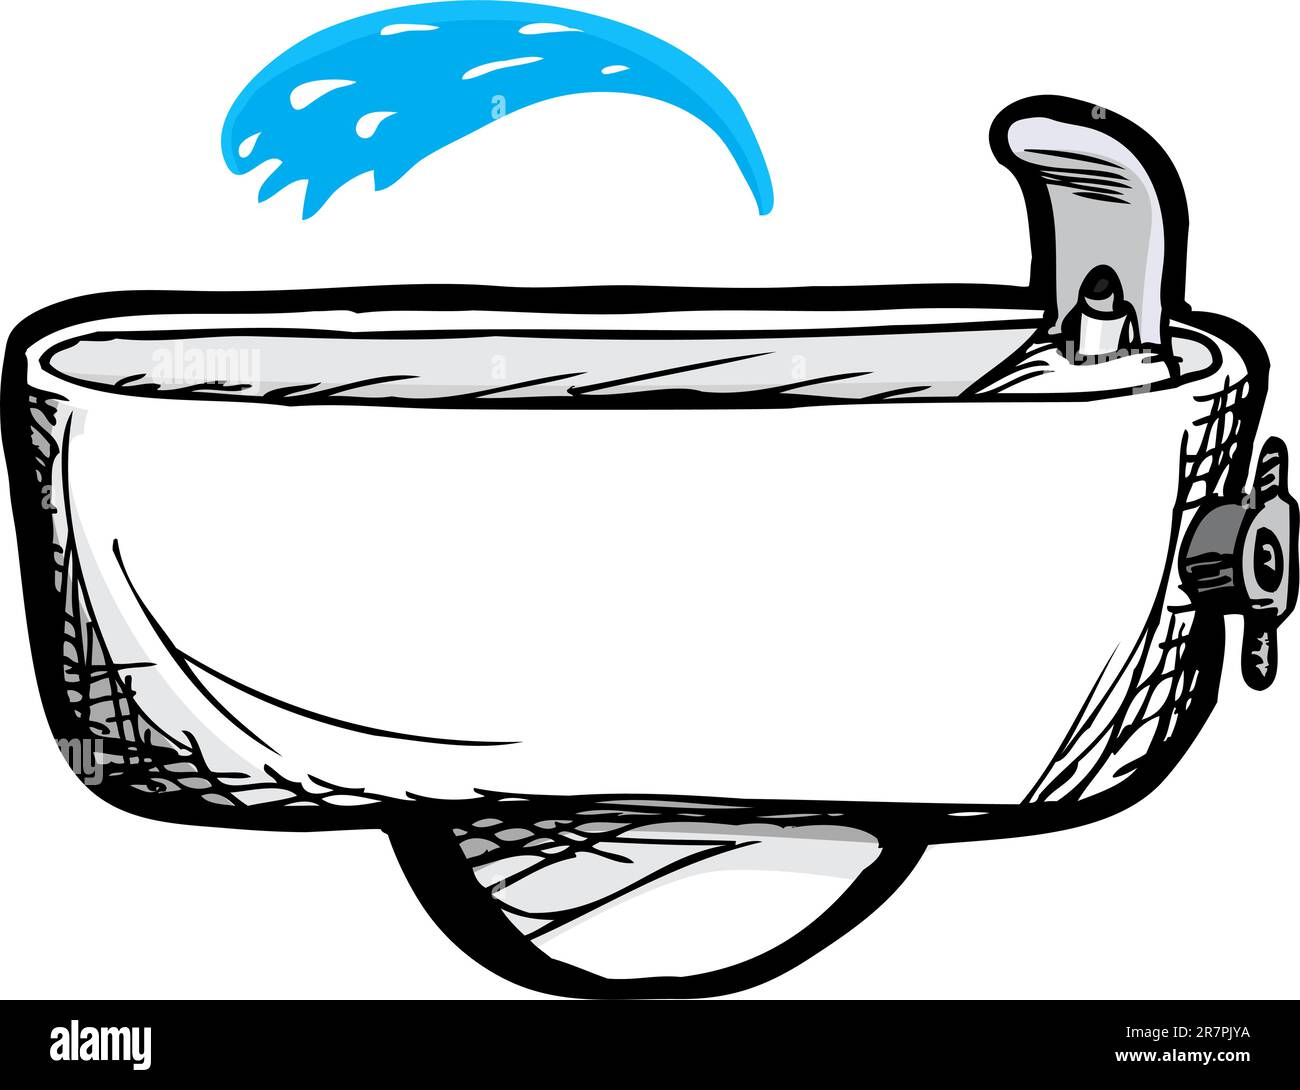 Ivory wall-mounted water drinking fountain with water spout Stock Vector